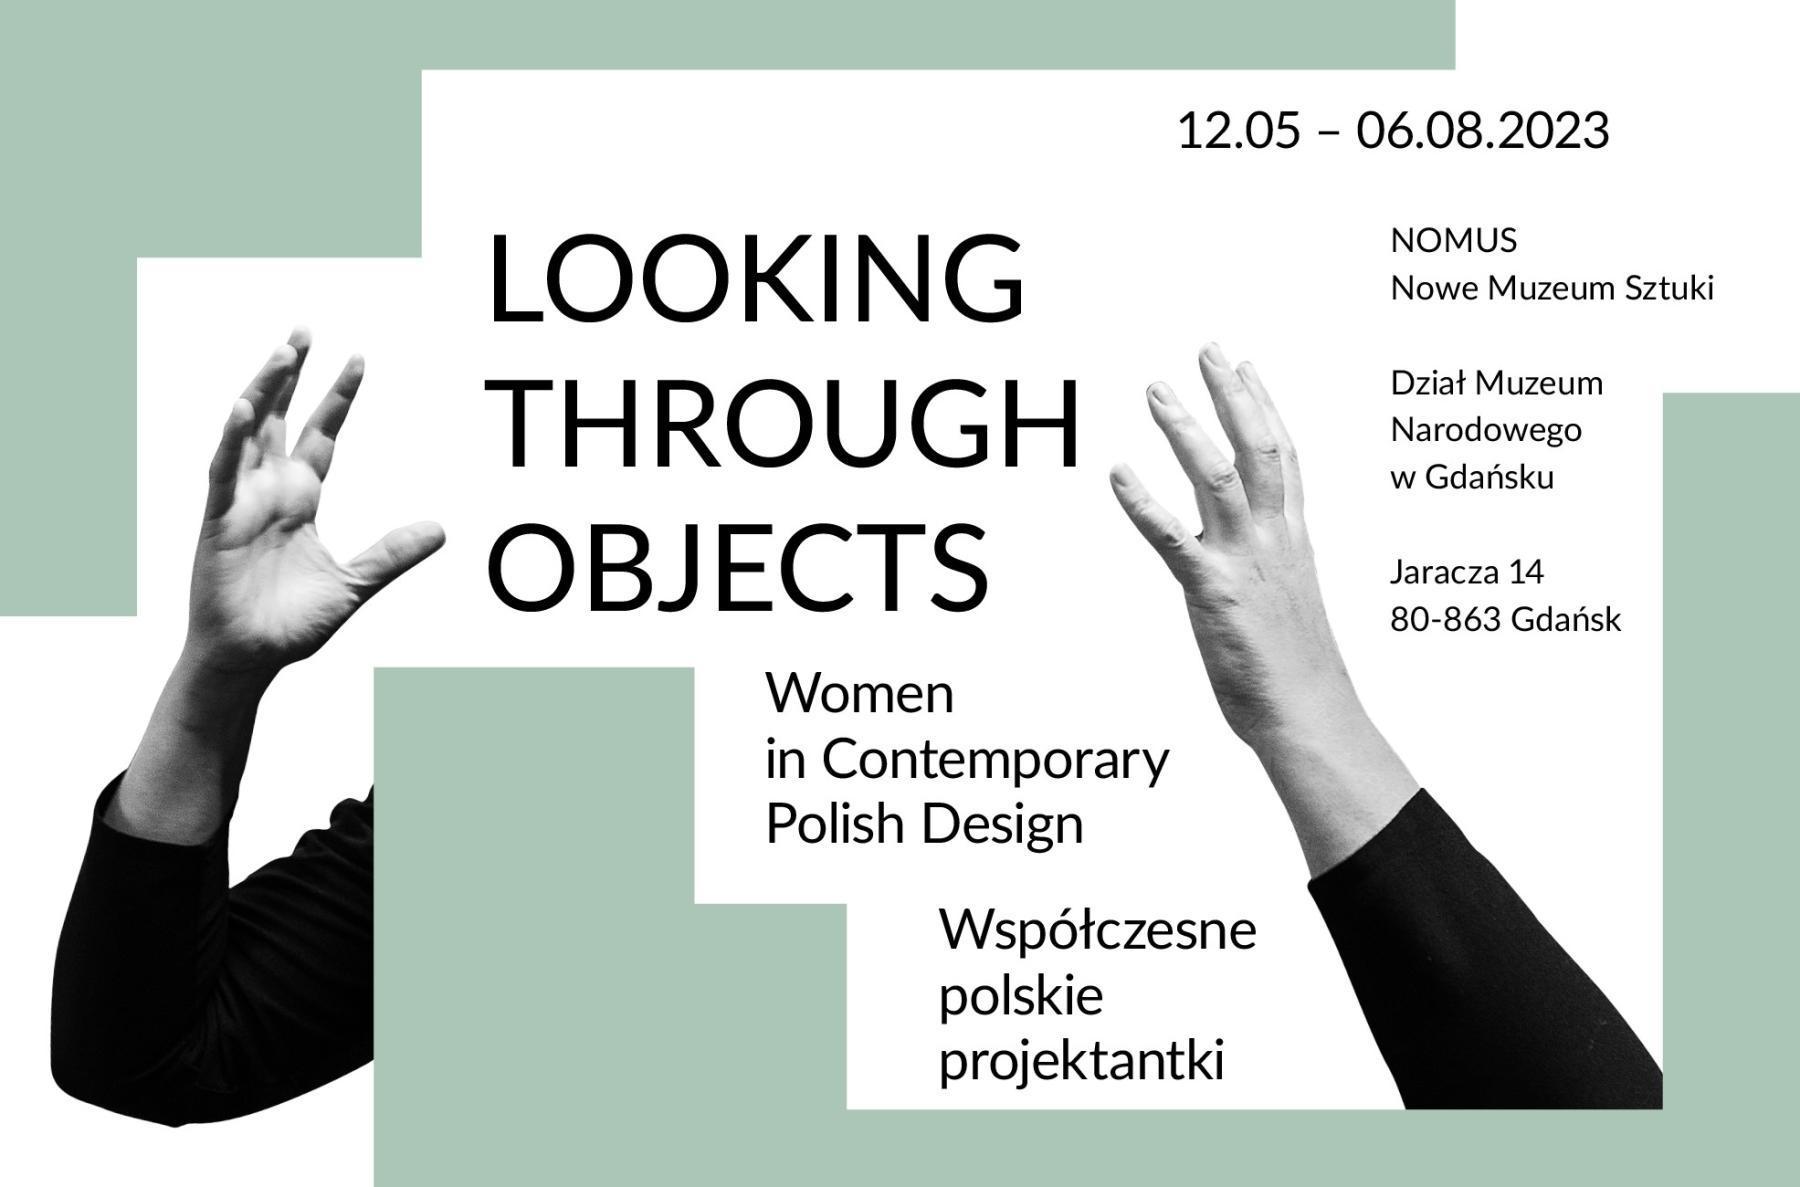 "Looking Through Objects" poster with text information about the exhibition